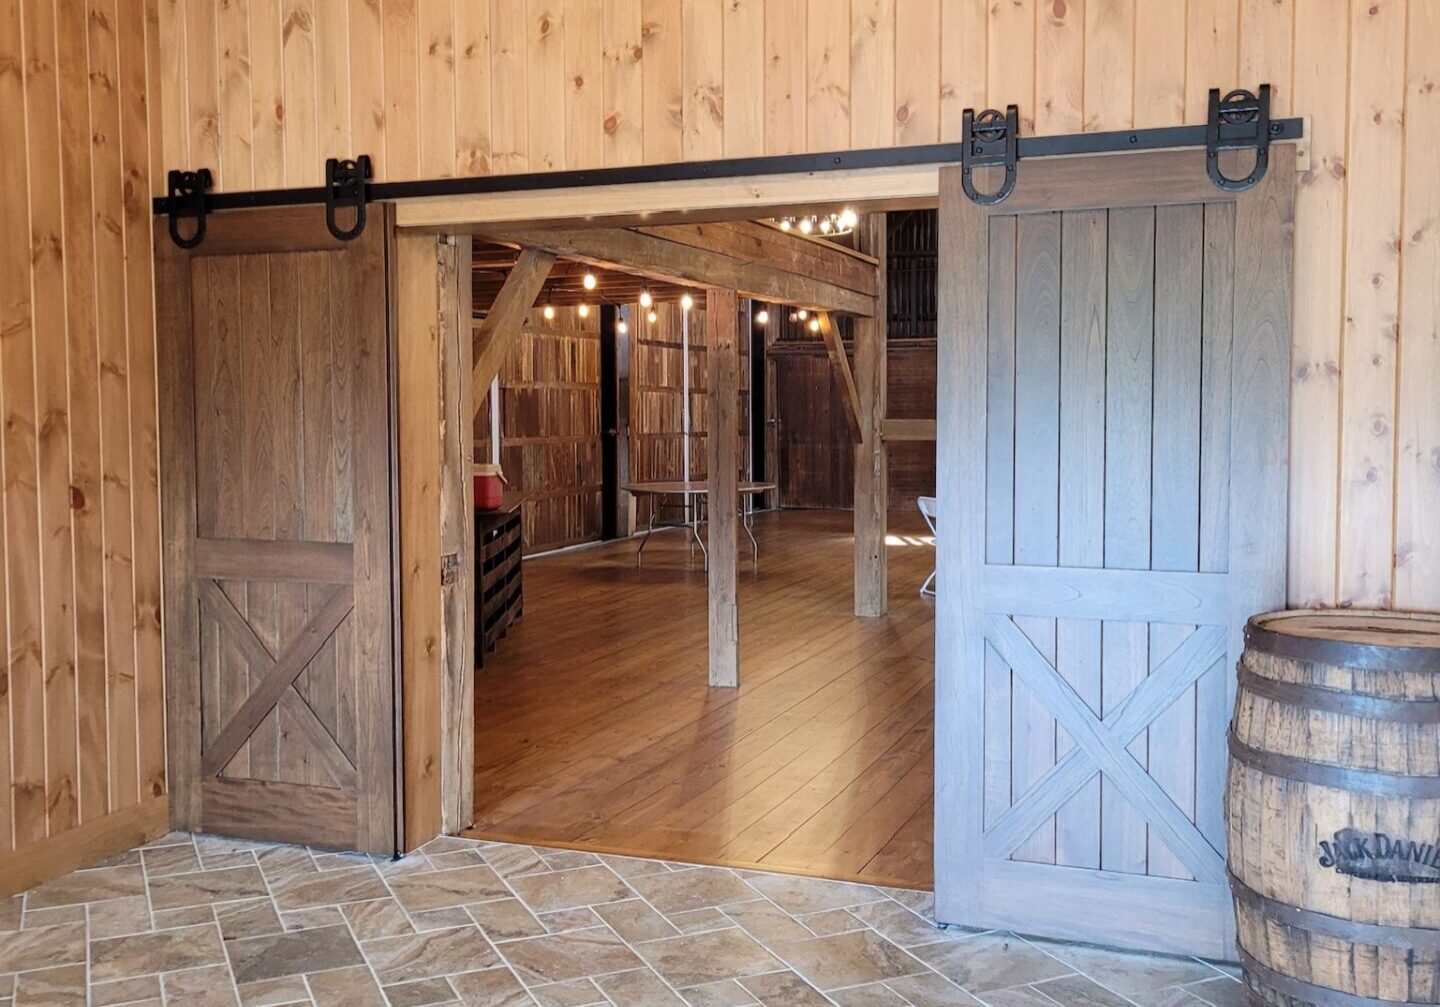 There are two double doors leading into the Barn